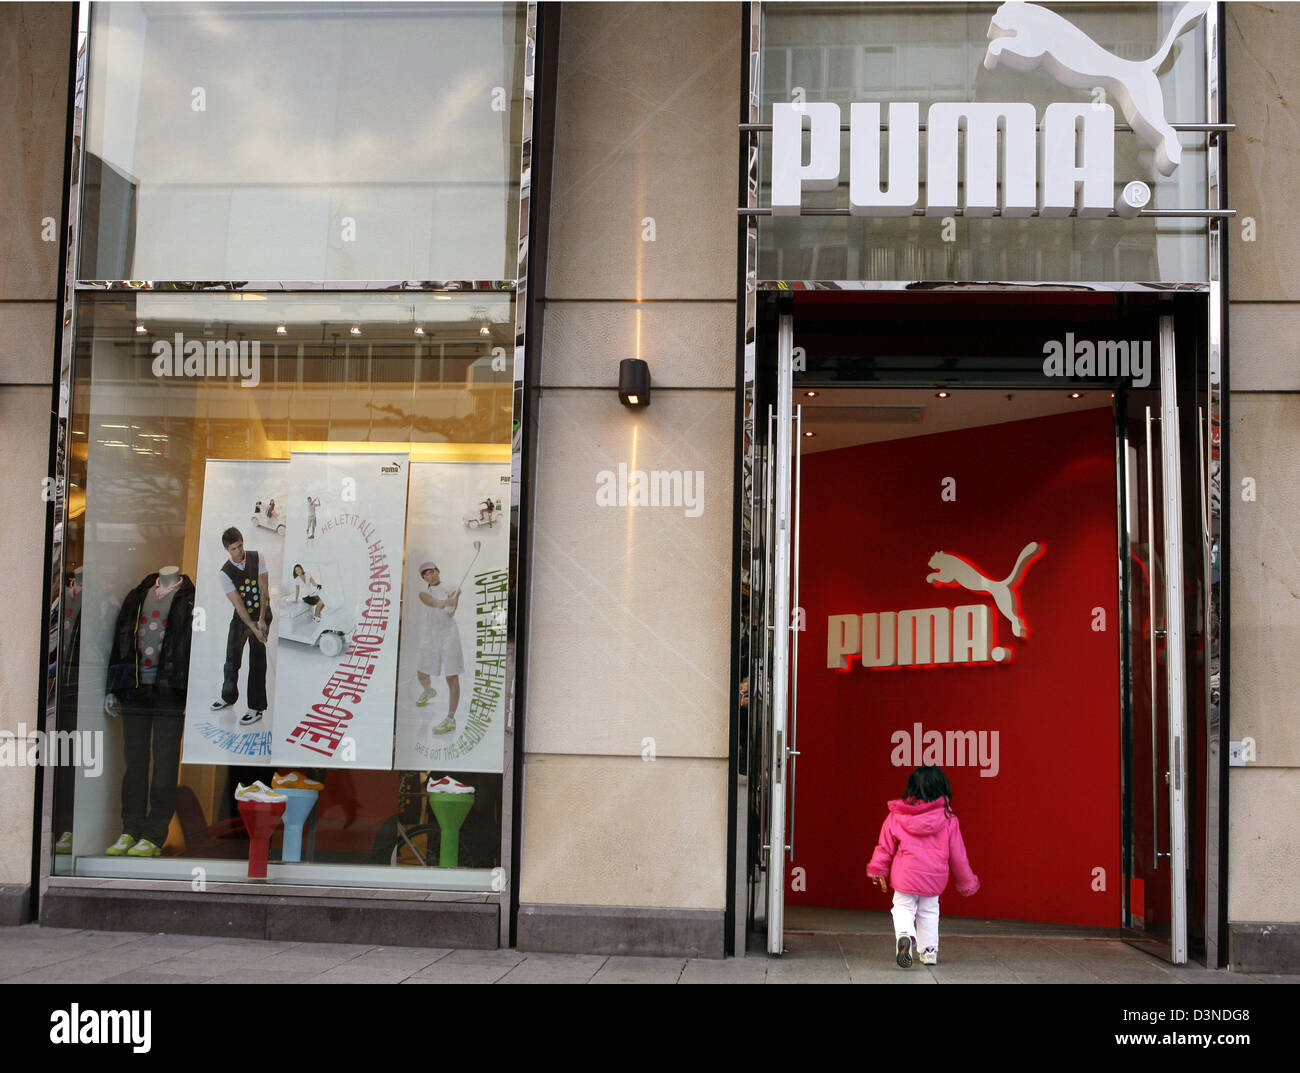 The picture shows consumers at the entrance to the Puma store on Europe's  most profit-yielding